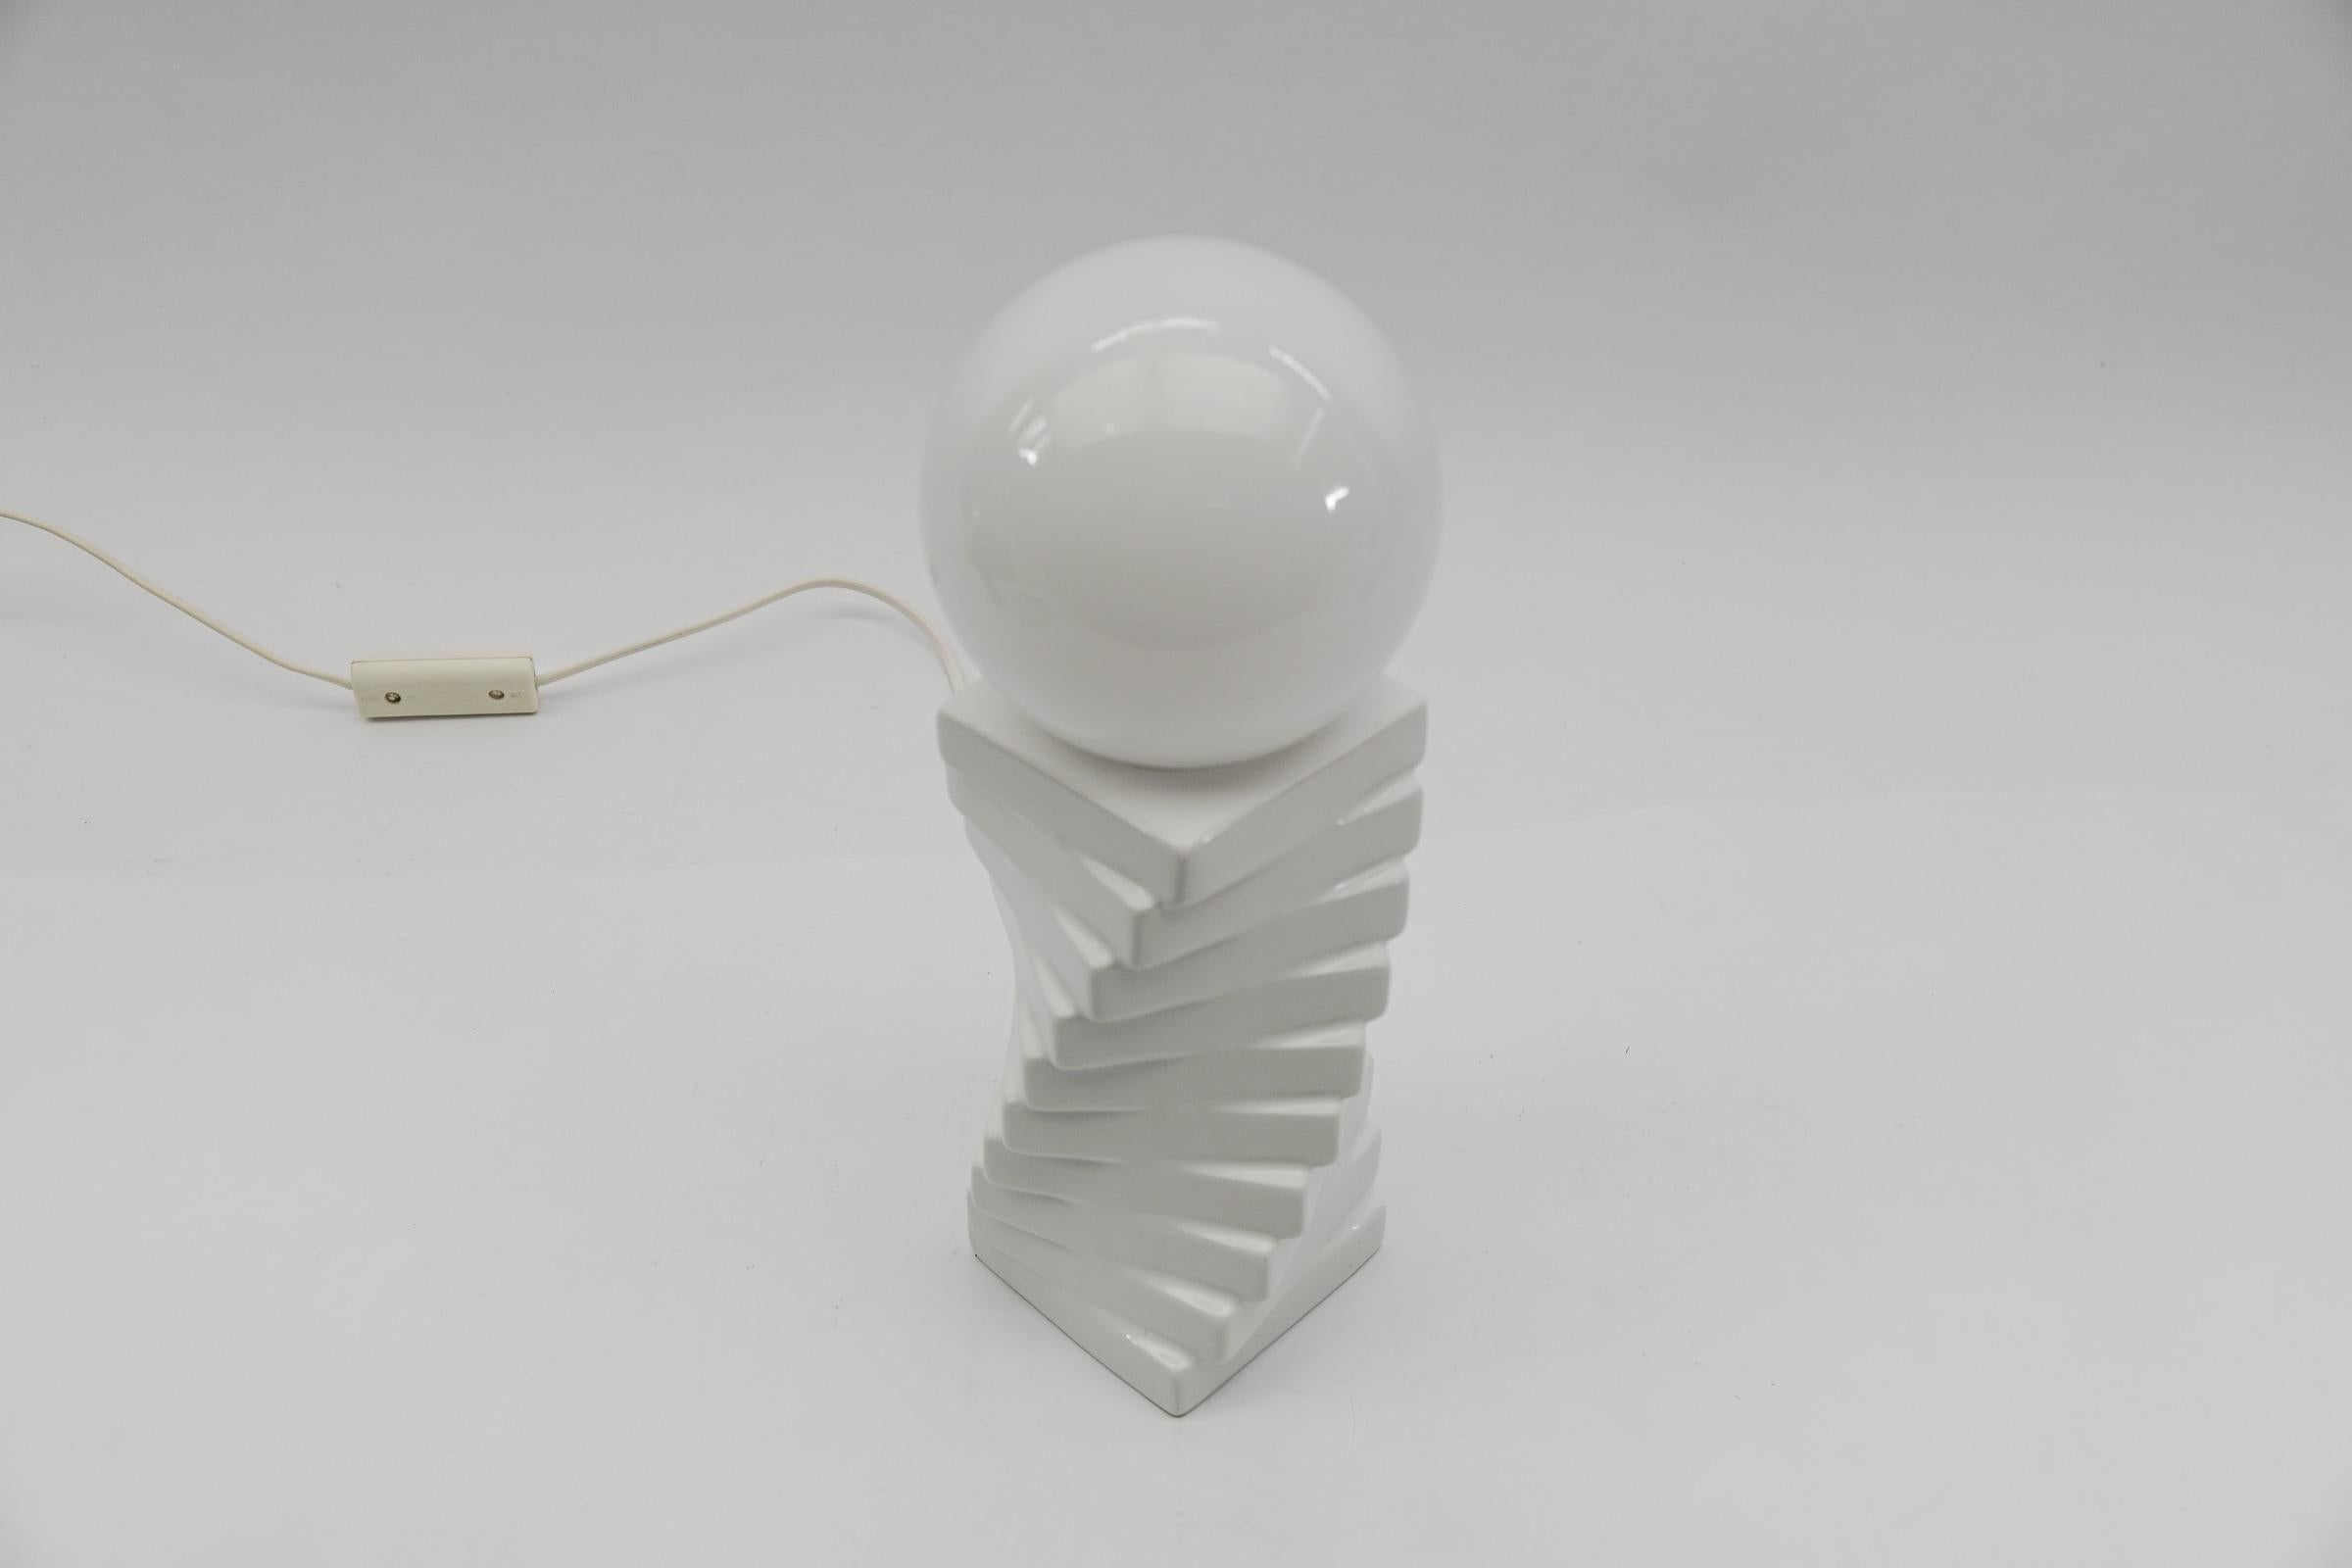 Italian Ceramic Table Lamp with a Milk Glass Ball Shade, 1960s For Sale 2